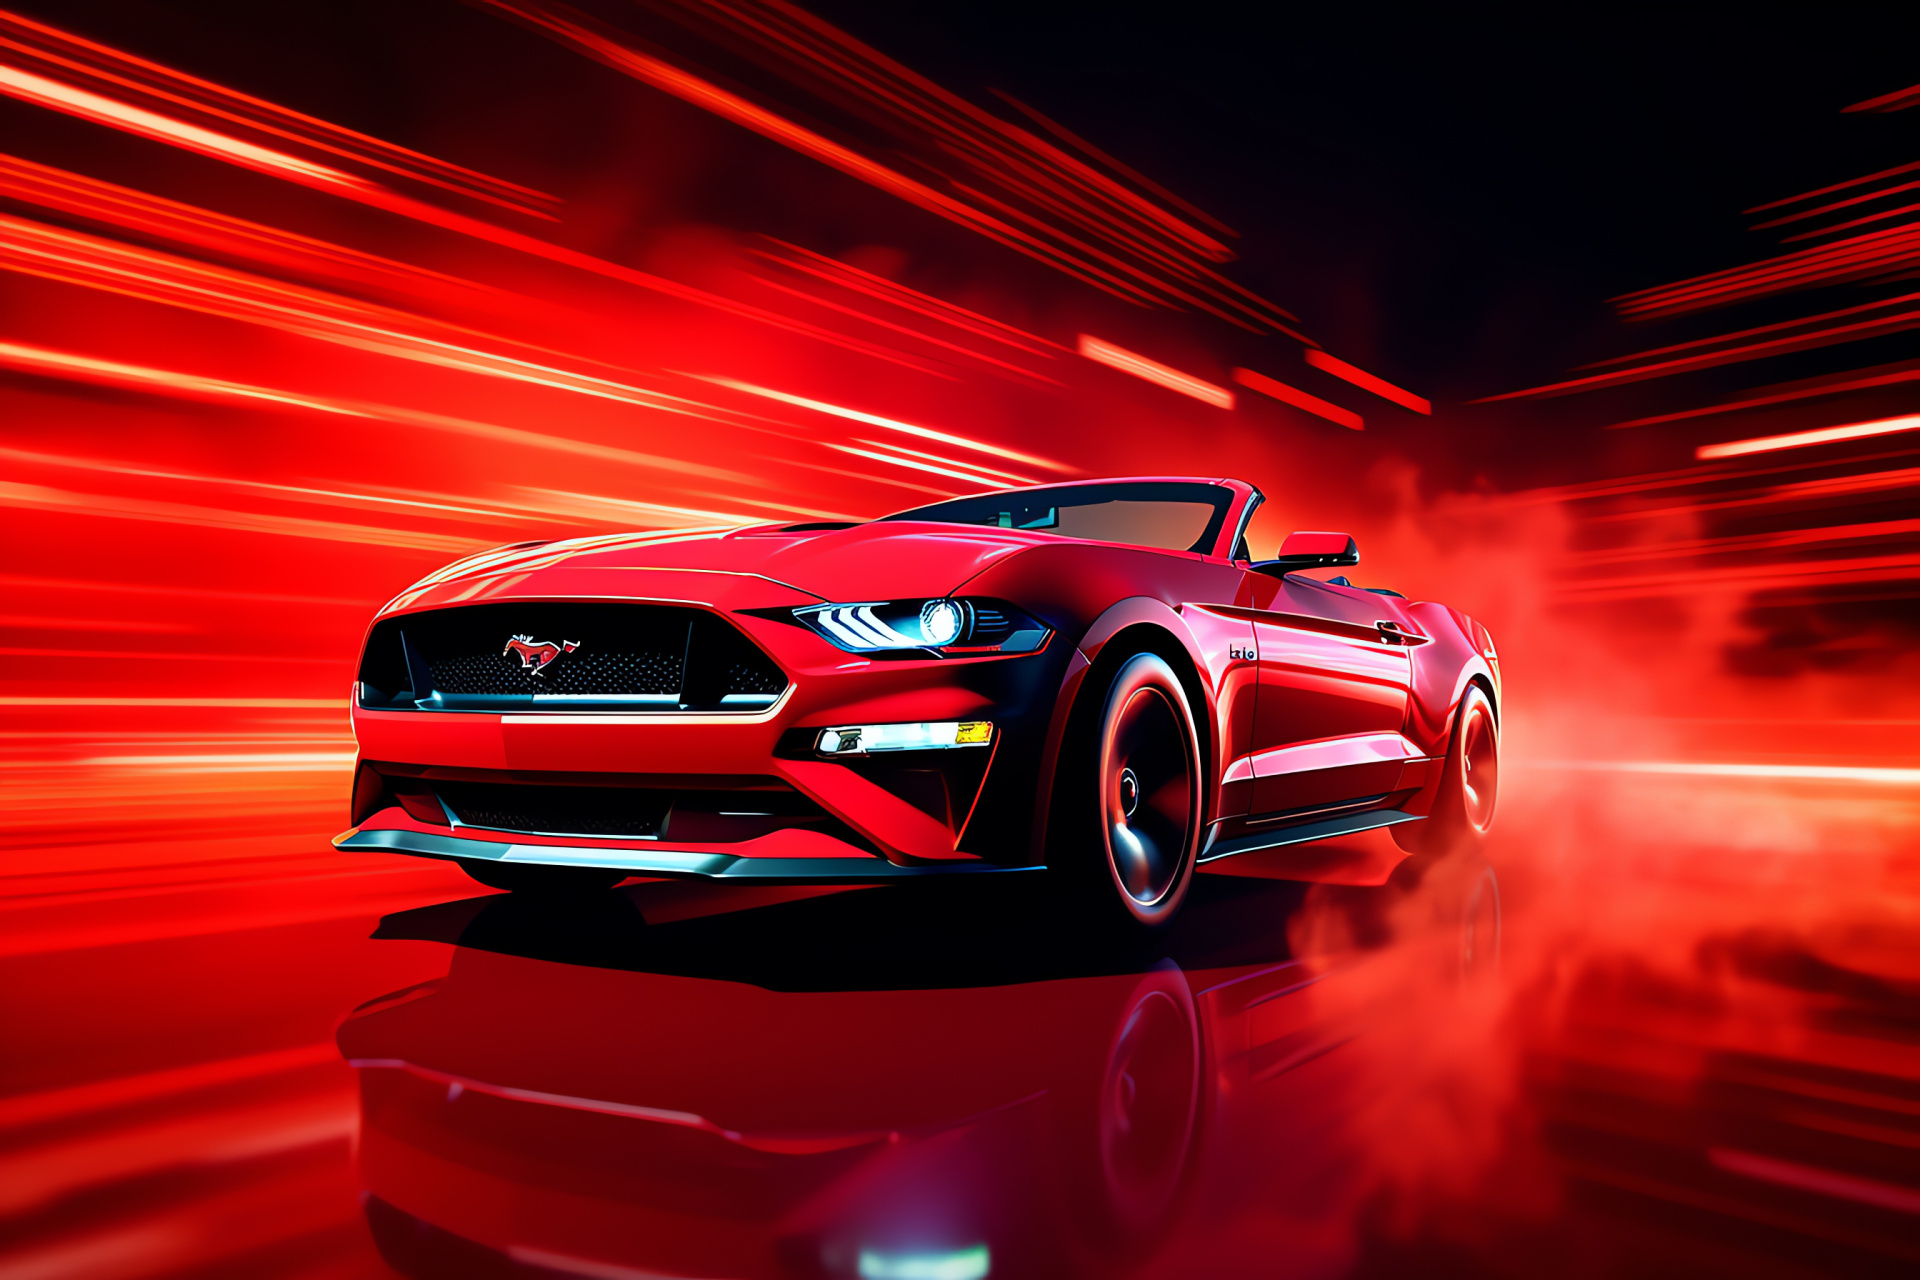 Red Mustang, Bold background, American classic, Sports car stance, Pony car passion, HD Desktop Image